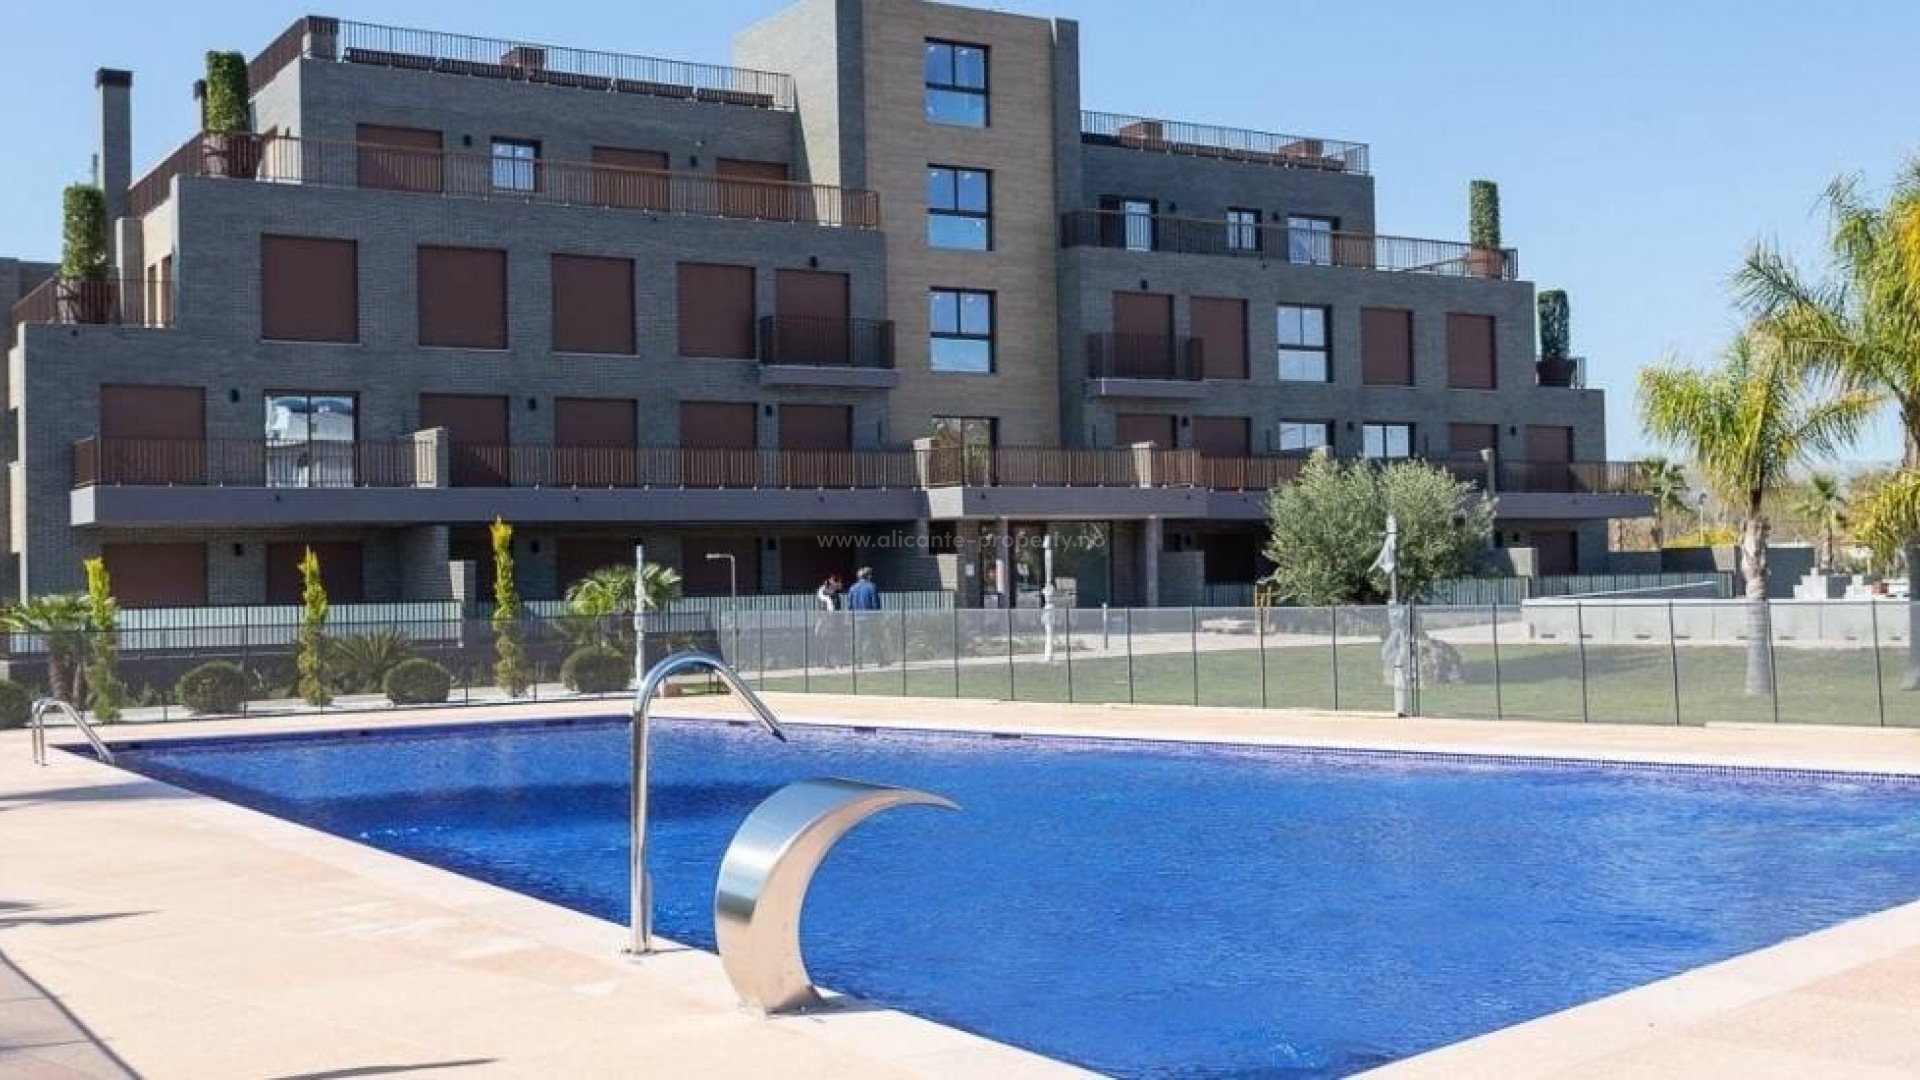 Modern apartments in Denia 400 meters from Les Deveses beach, 1/2/3 bedrooms, 1/2 bathrooms, great leisure and sports attractions, close to golf courses and horse riding